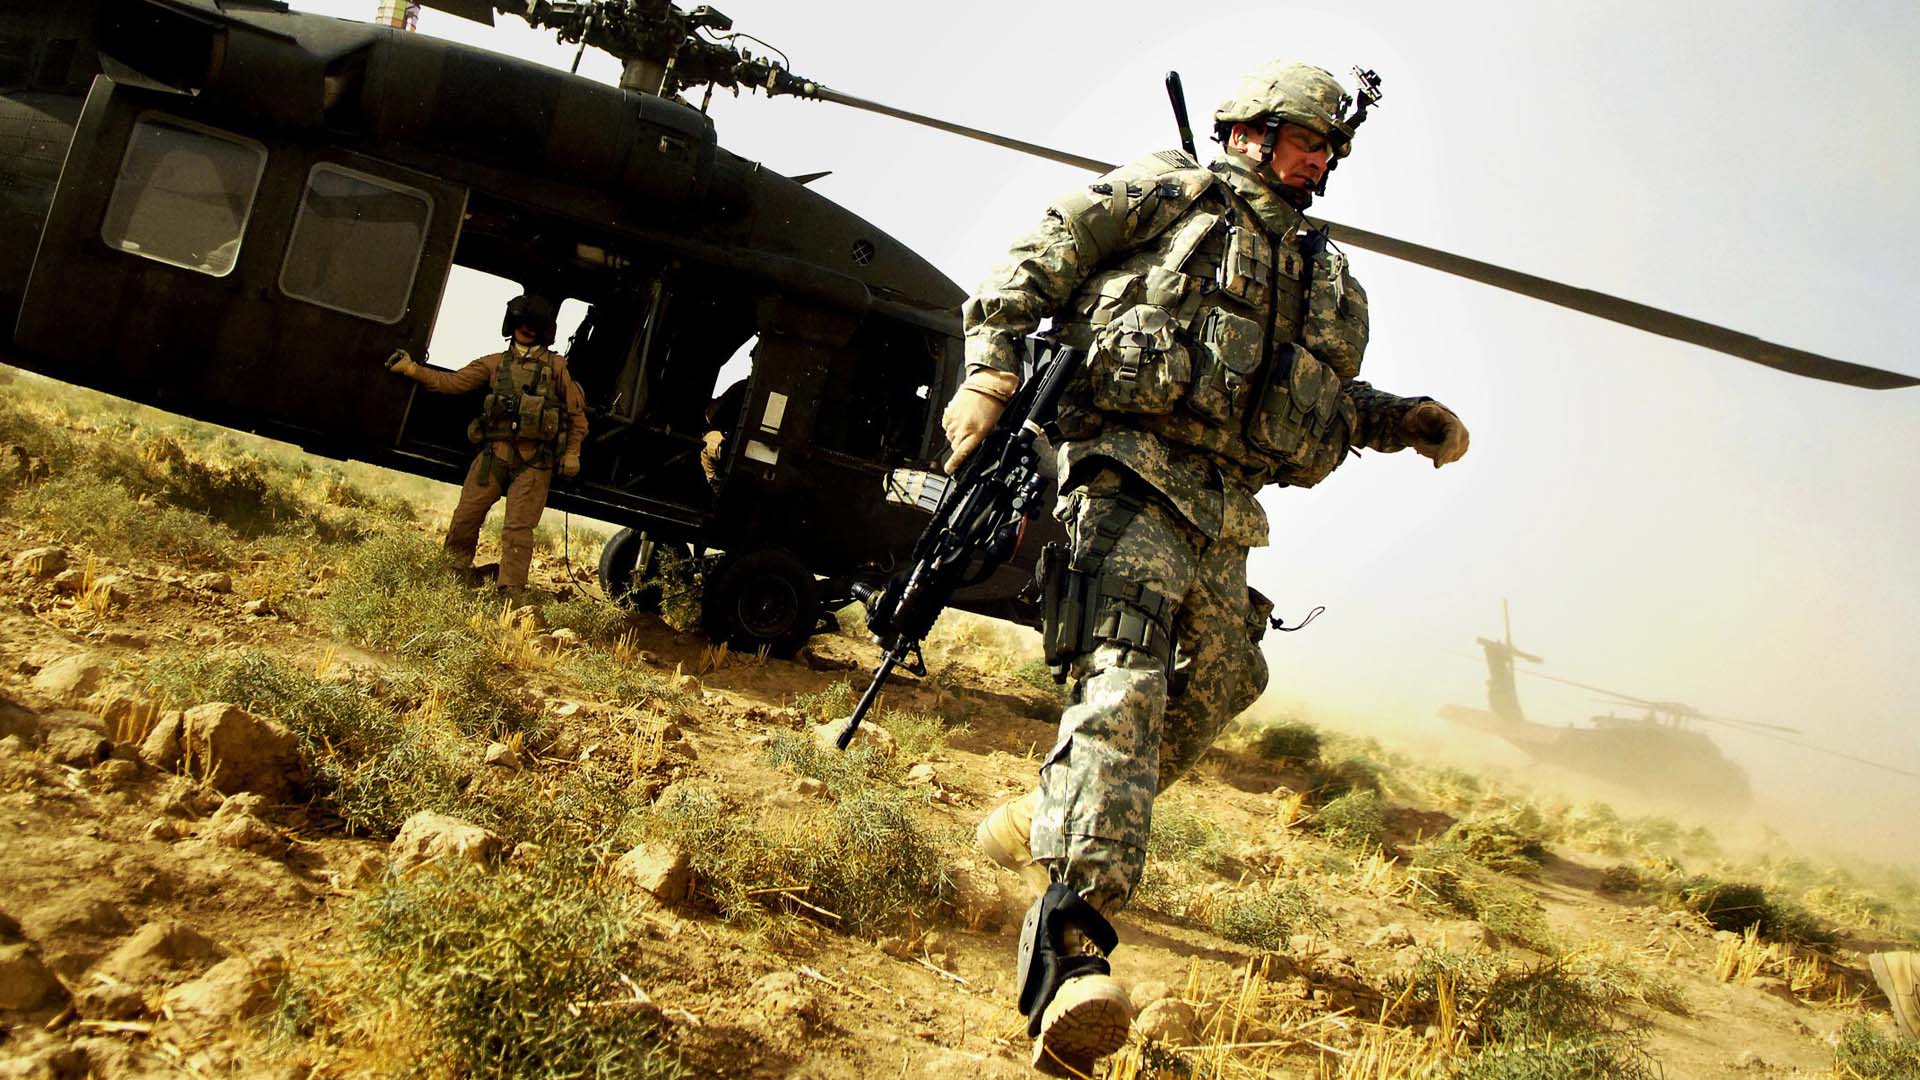 Free download Us Army Soldier Wallpaper Full HD Daily Background